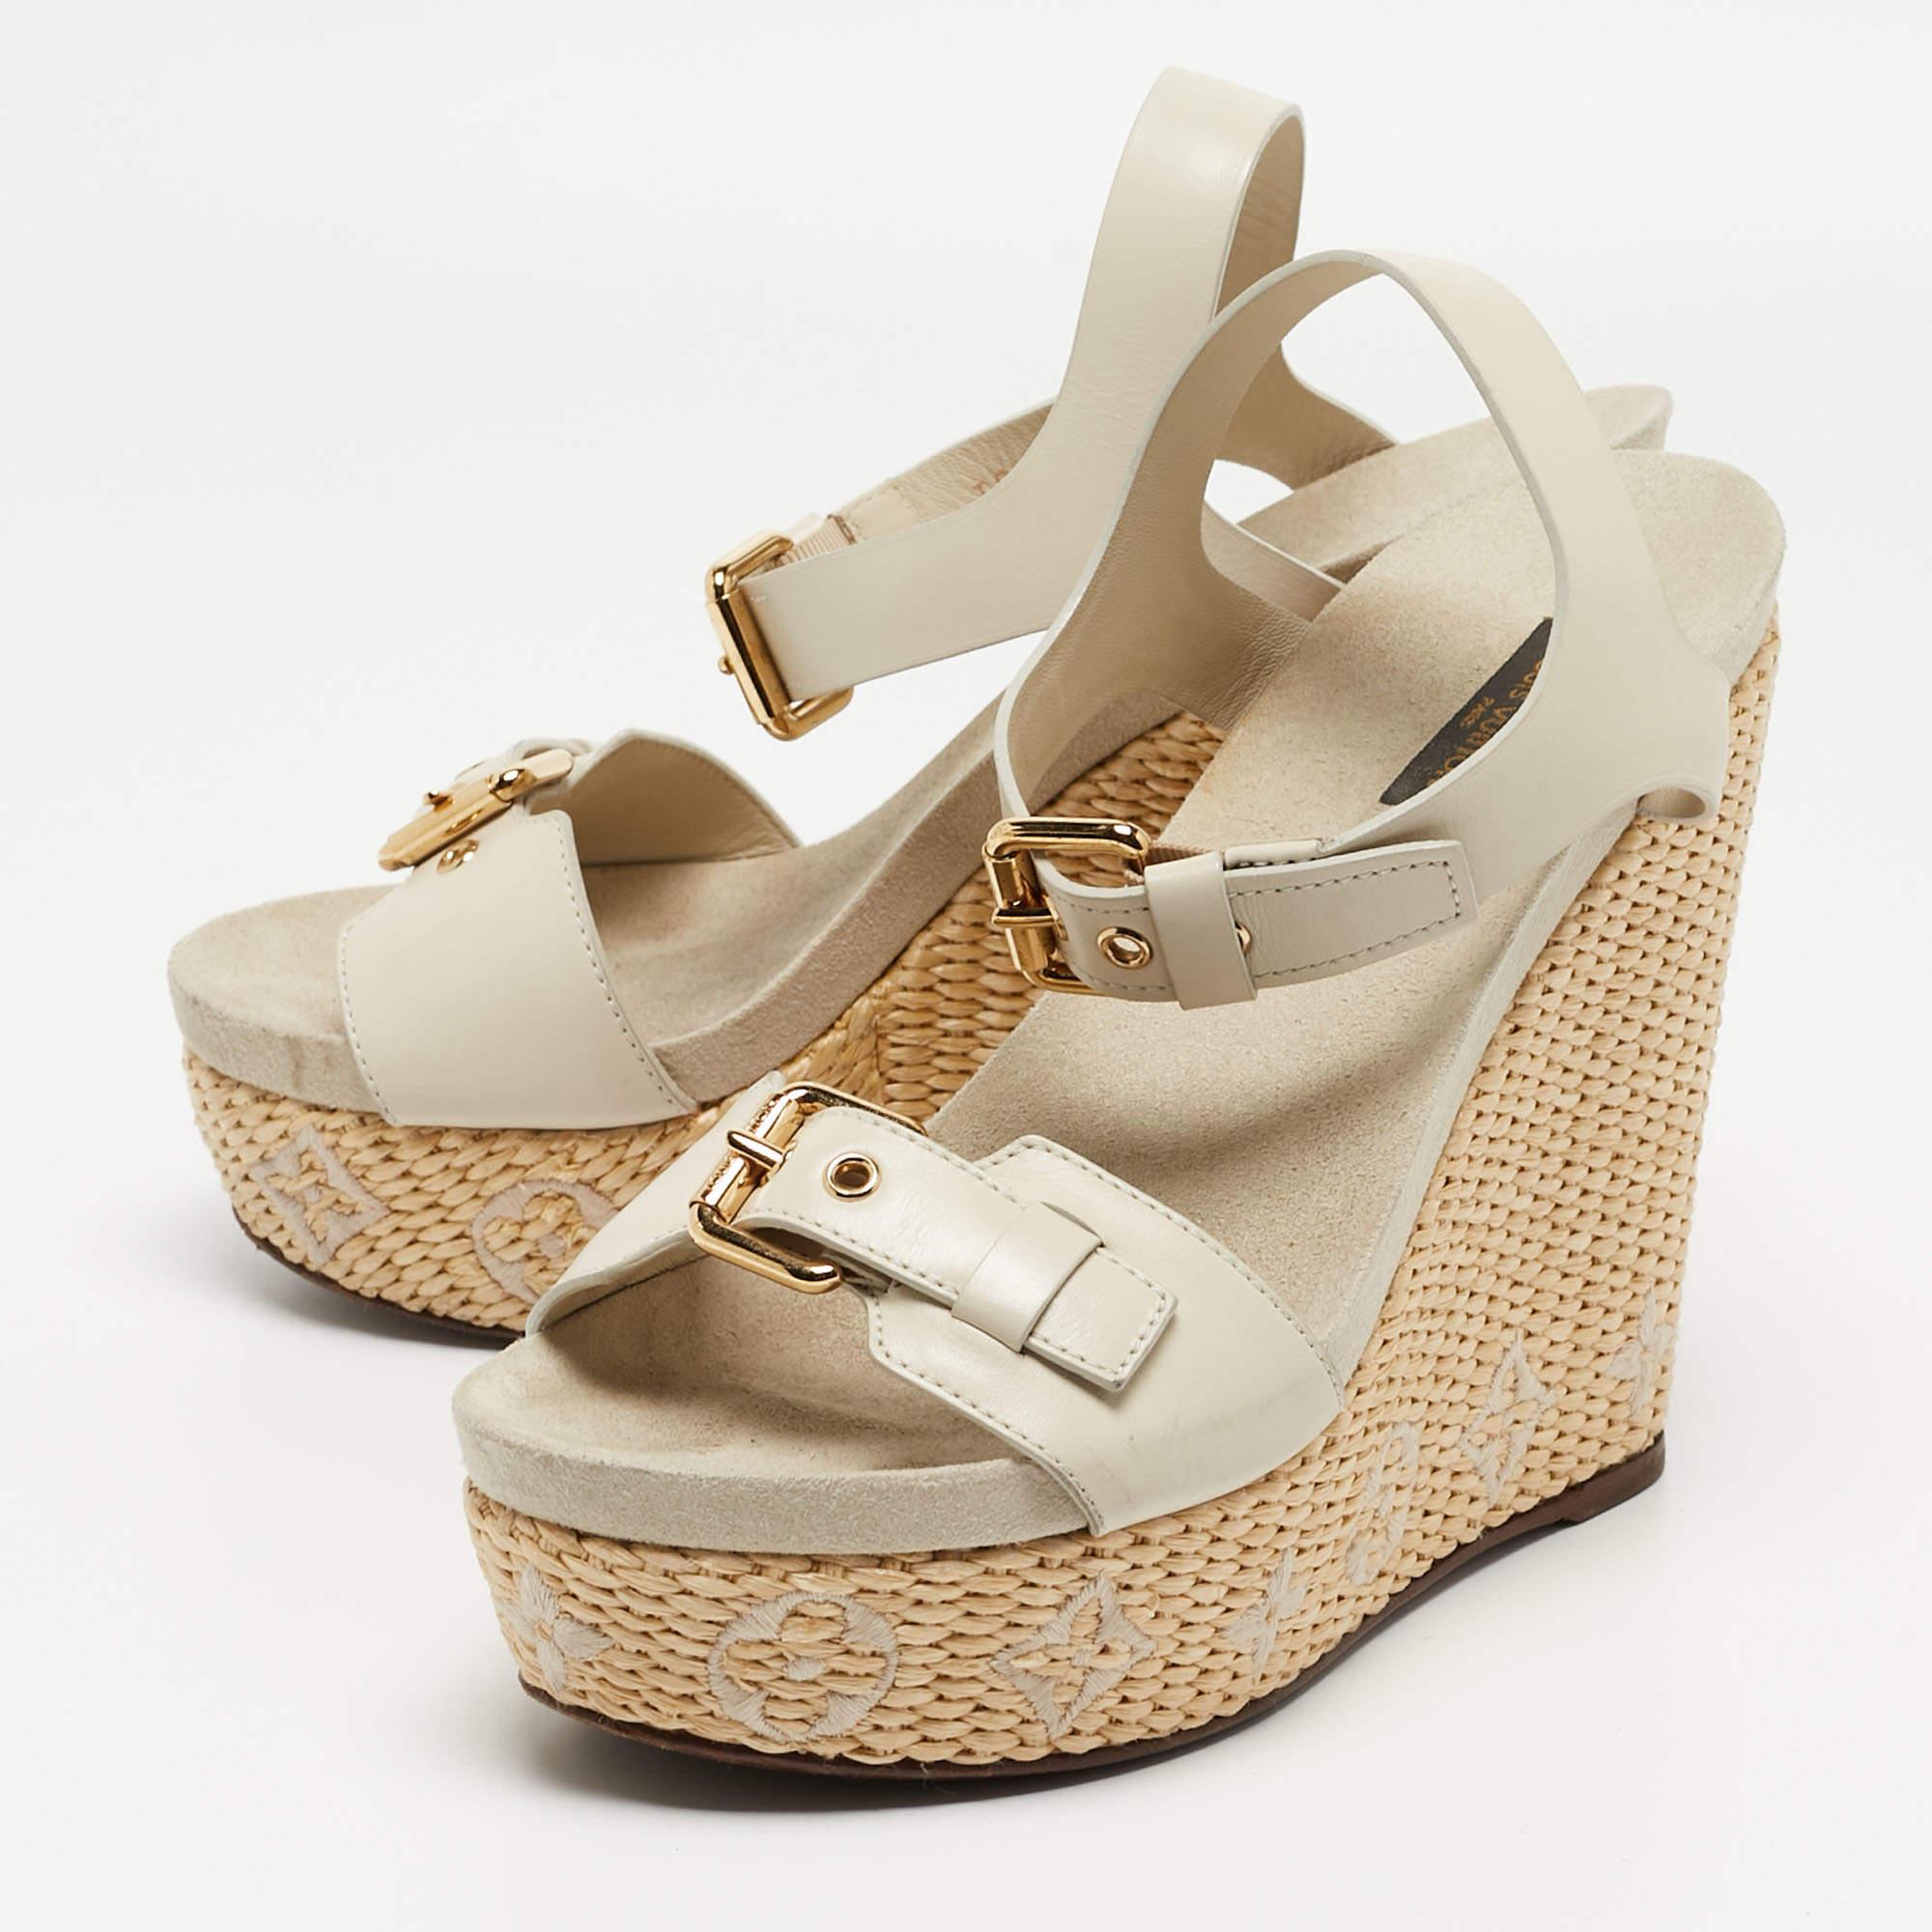 Perfectly sewn and finished to ensure an elegant look and fit, these LV wedge shoes are a purchase you'll love flaunting. They look great on the feet.

